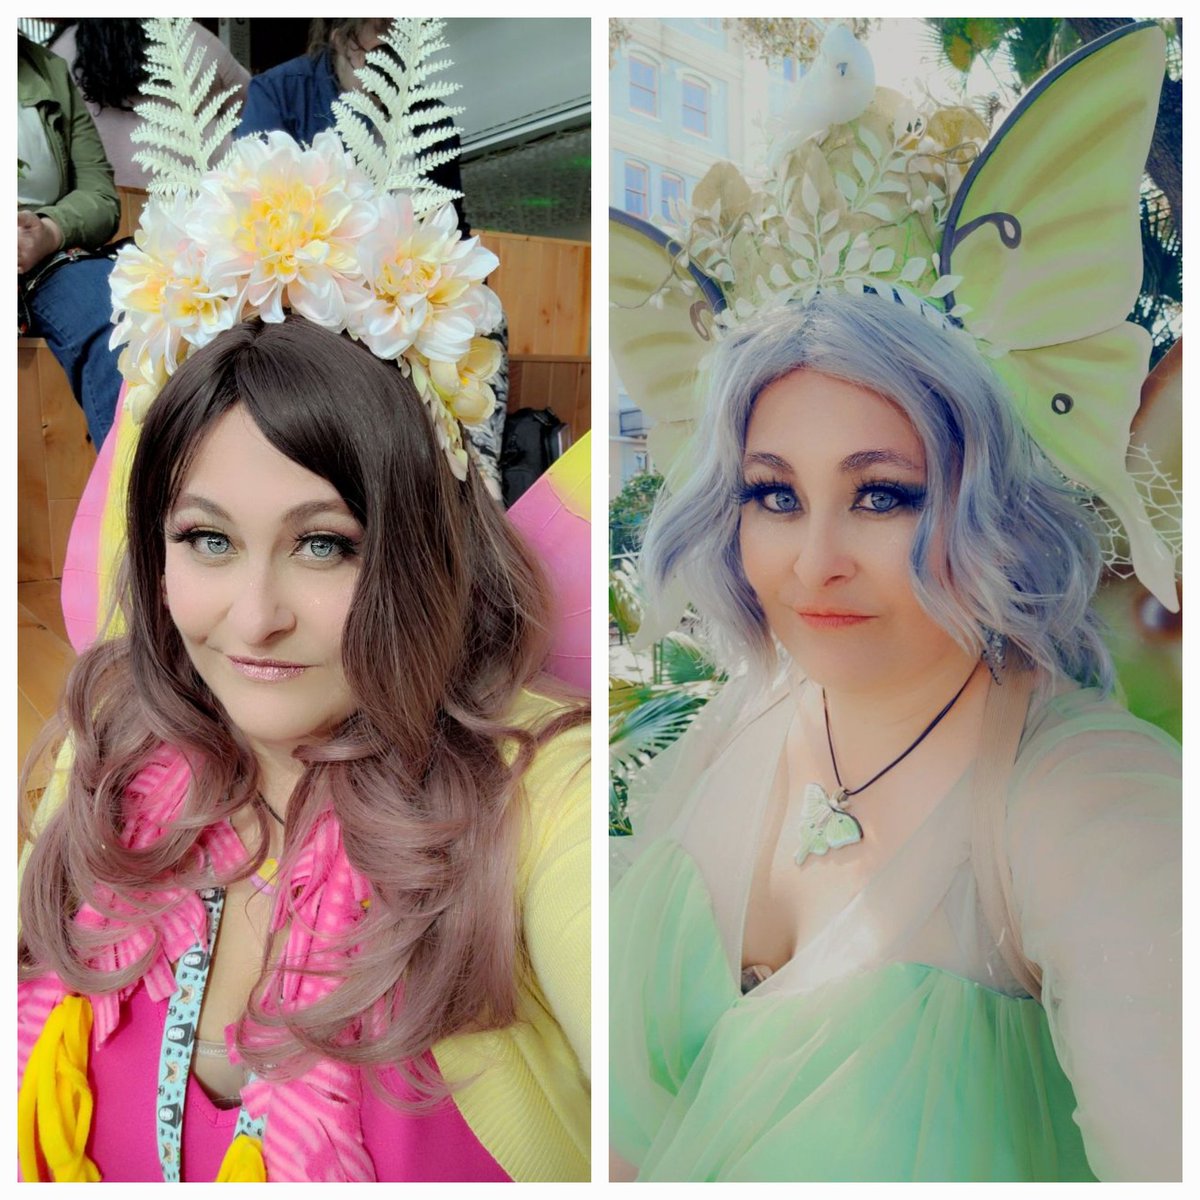 Two different moth costumes in two weeks! I am very normal, yes. #lunamoth #rosymaplemoth #cosplay #eccc2023 #eccc #mardigras #nola #ofmd #ofmdcosplay